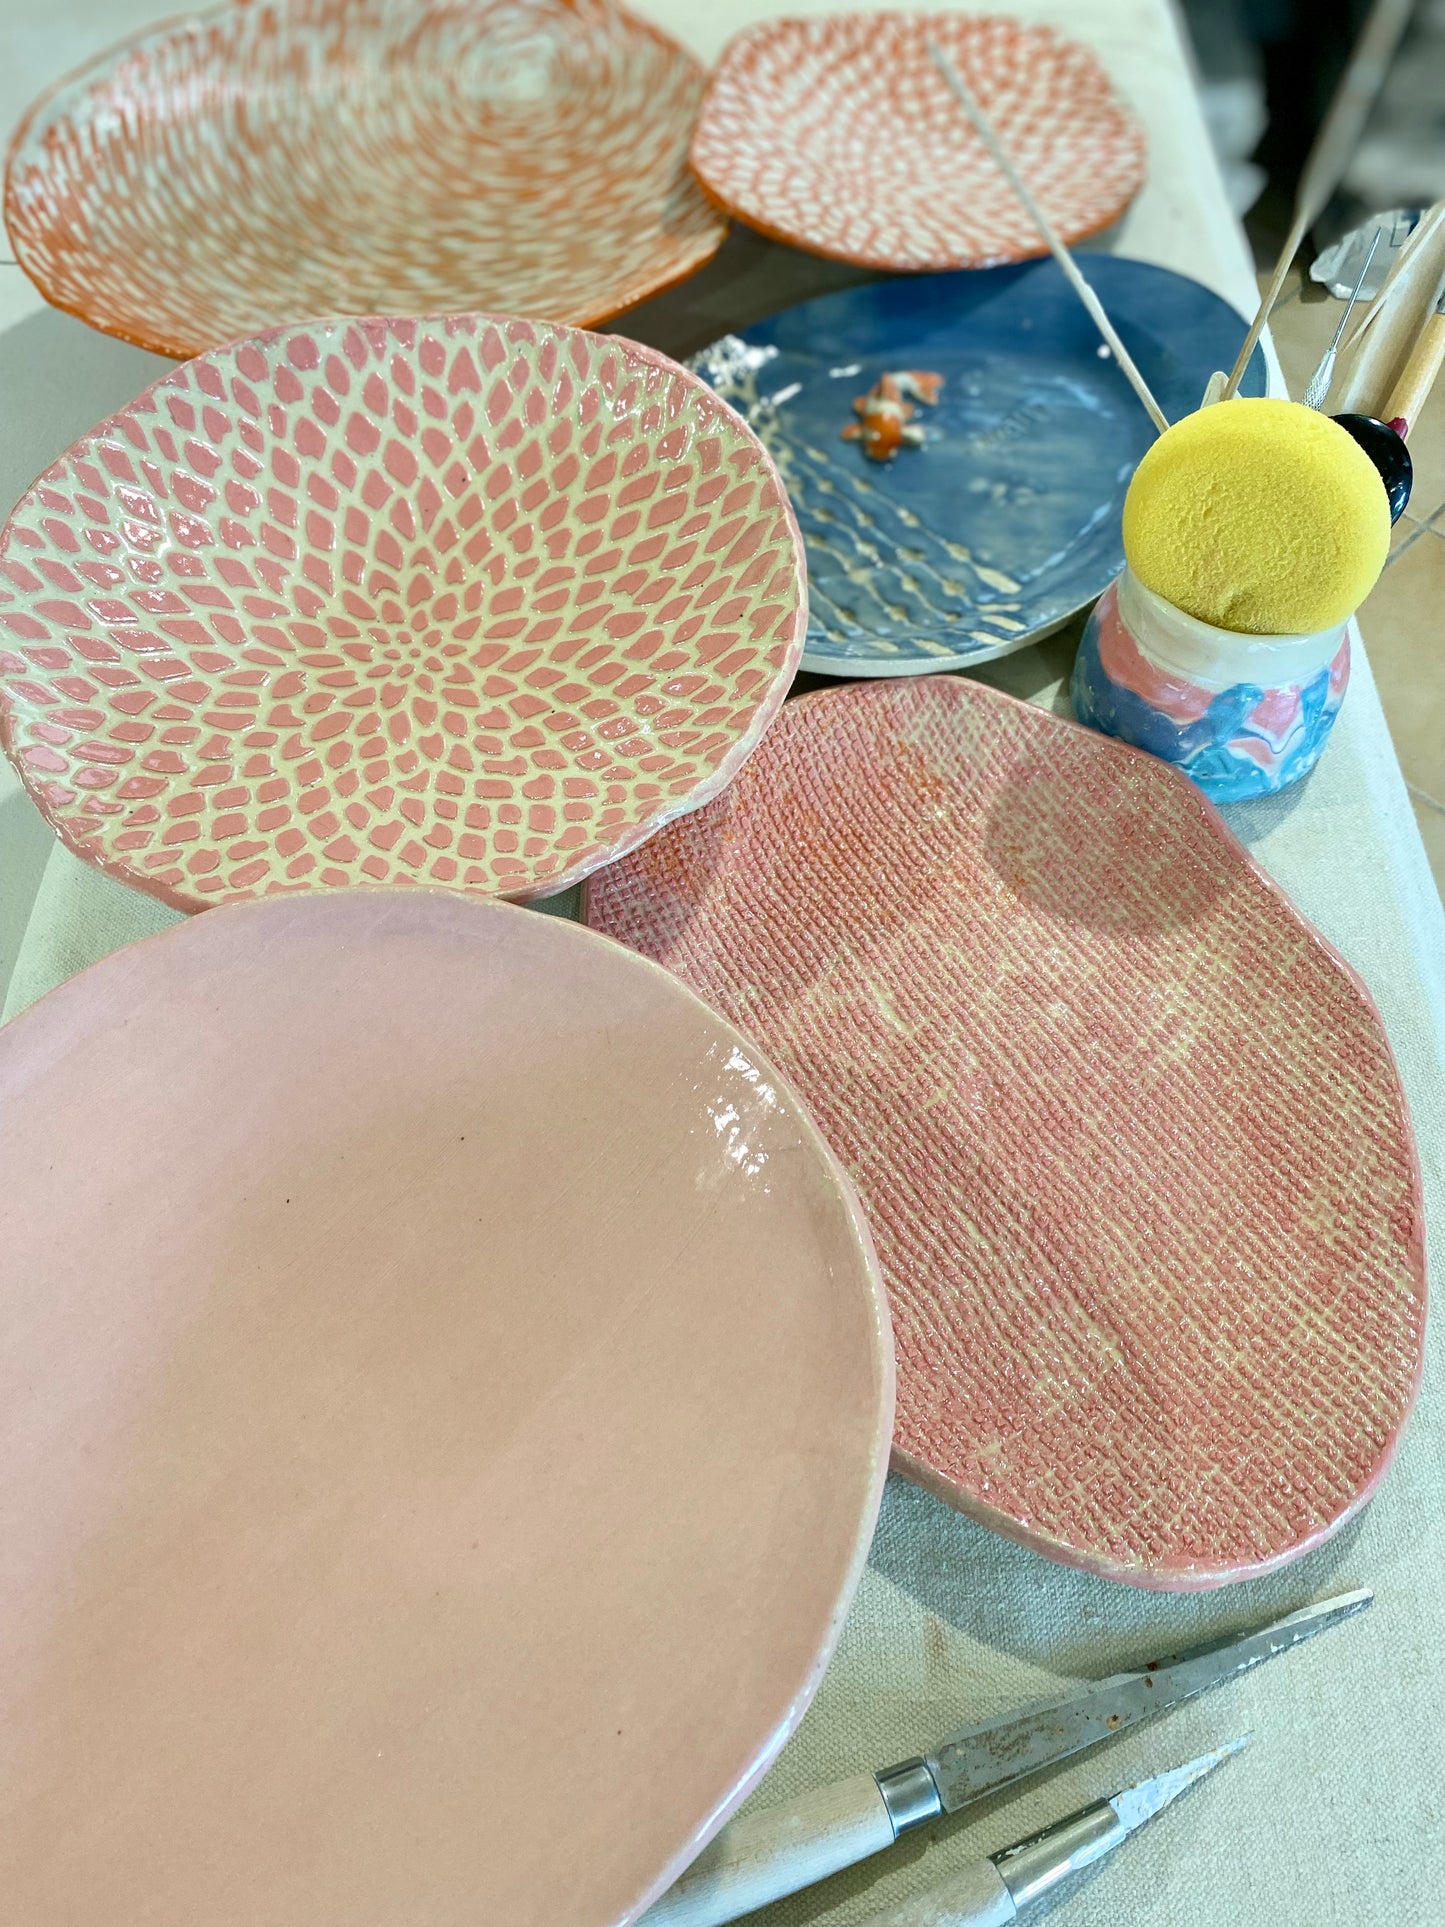 Pottery Class: plate or bowl